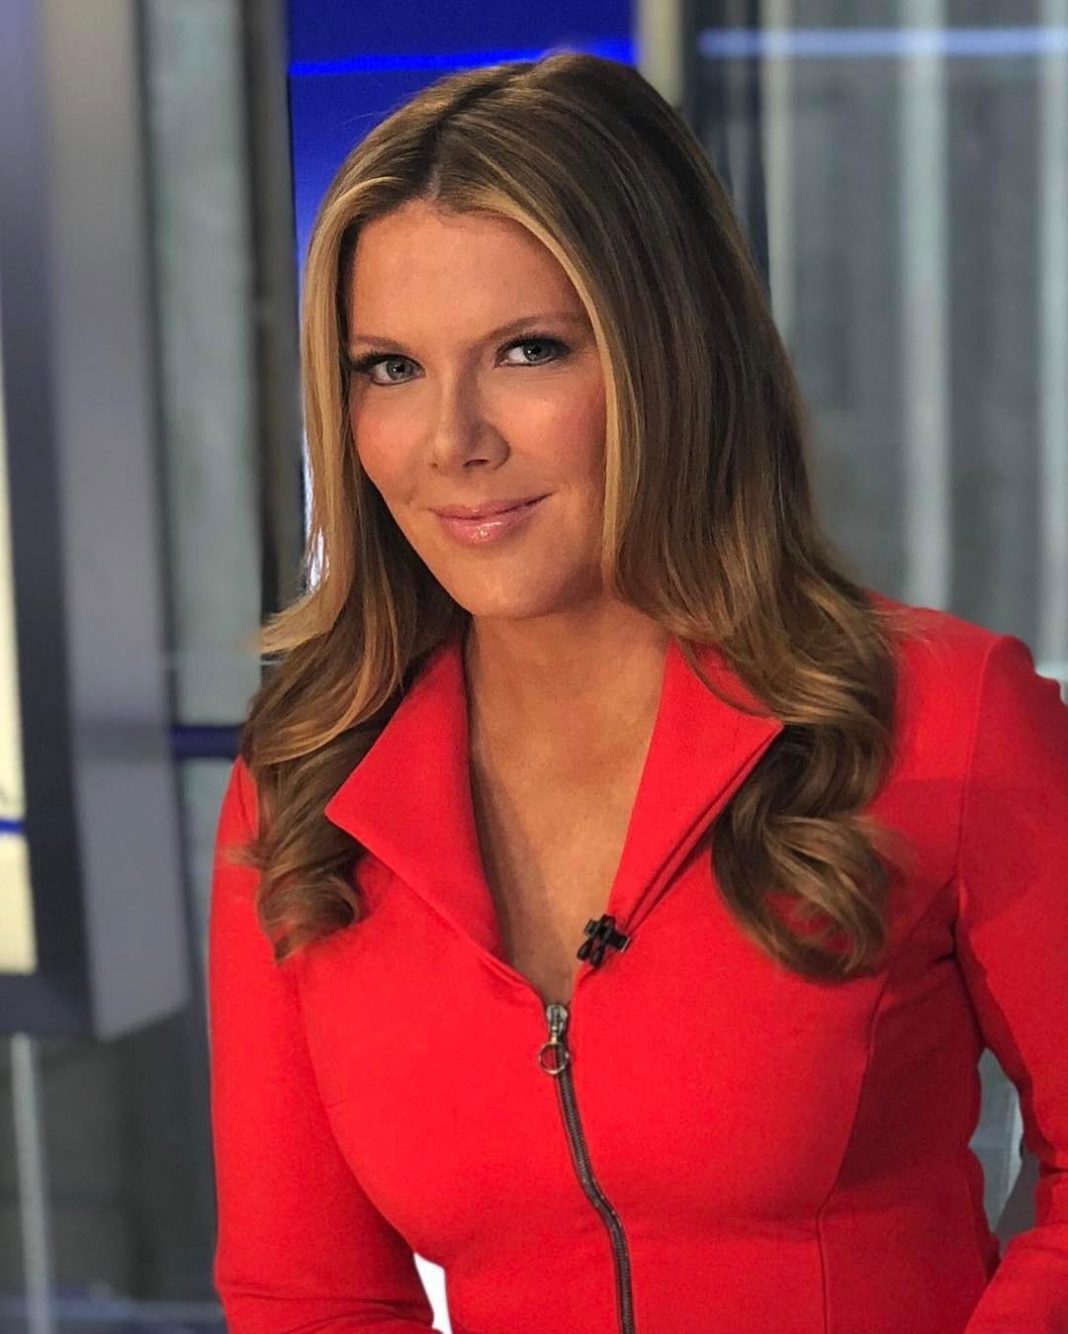 32 Trish Regan Nude Pictures Which Are Sure To Keep You Charmed With Her Charisma 137